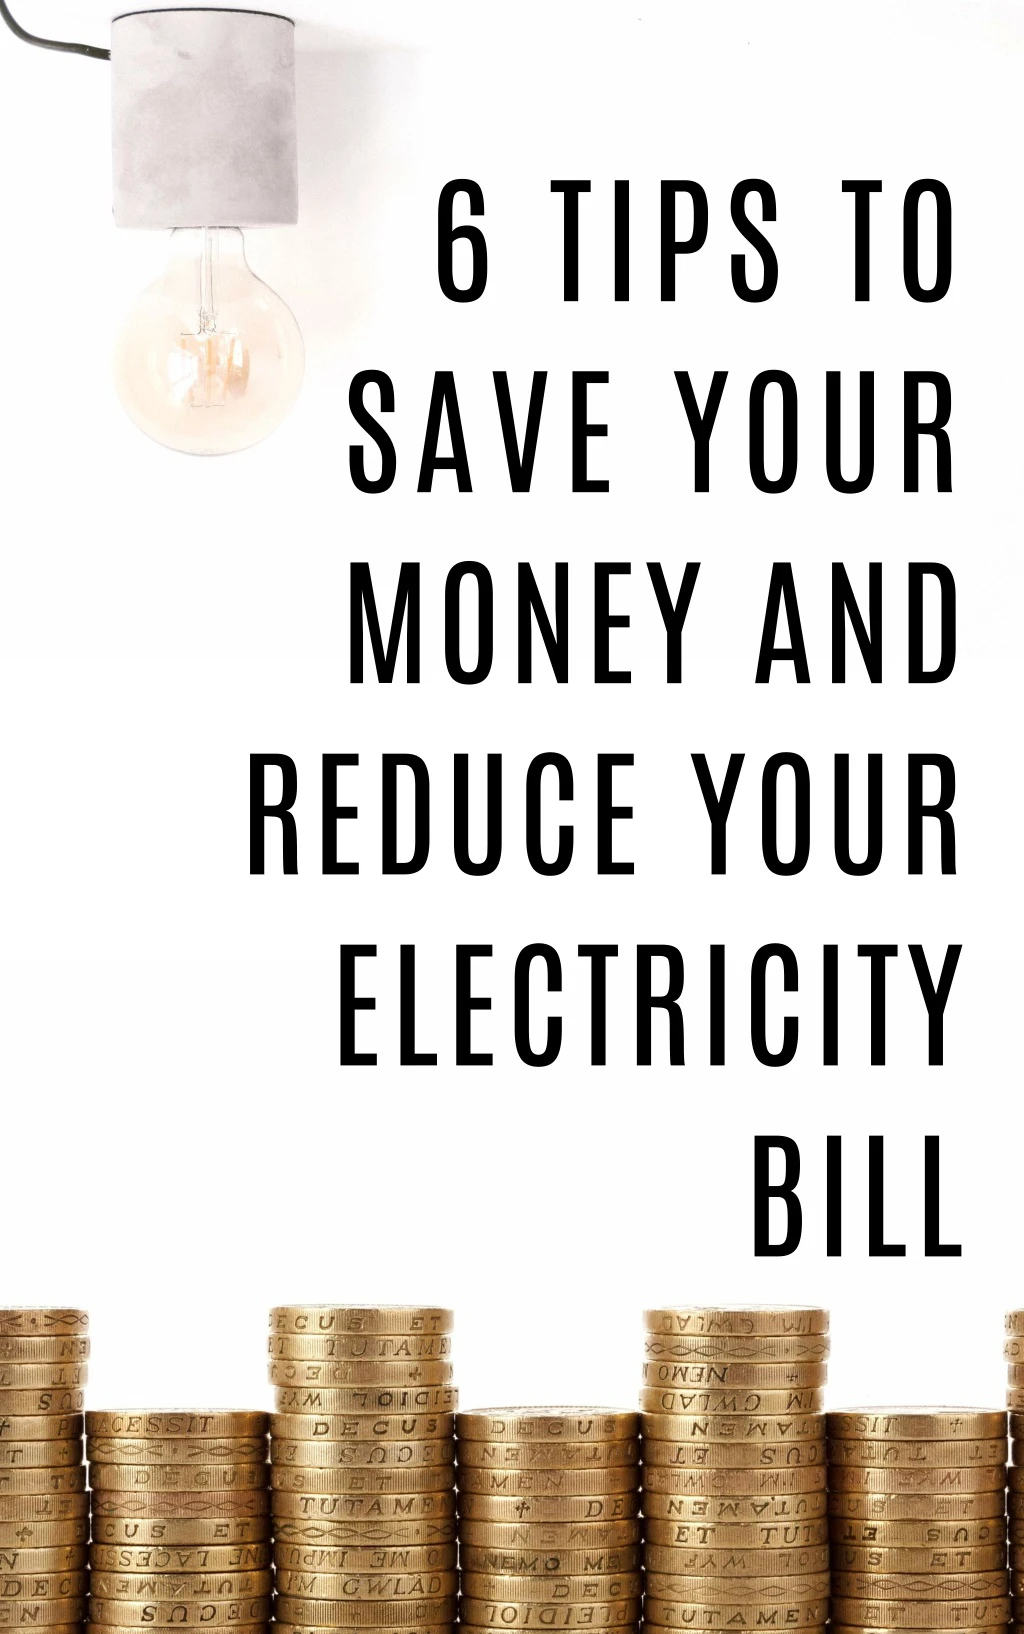 6 tips to save your money and reduce your